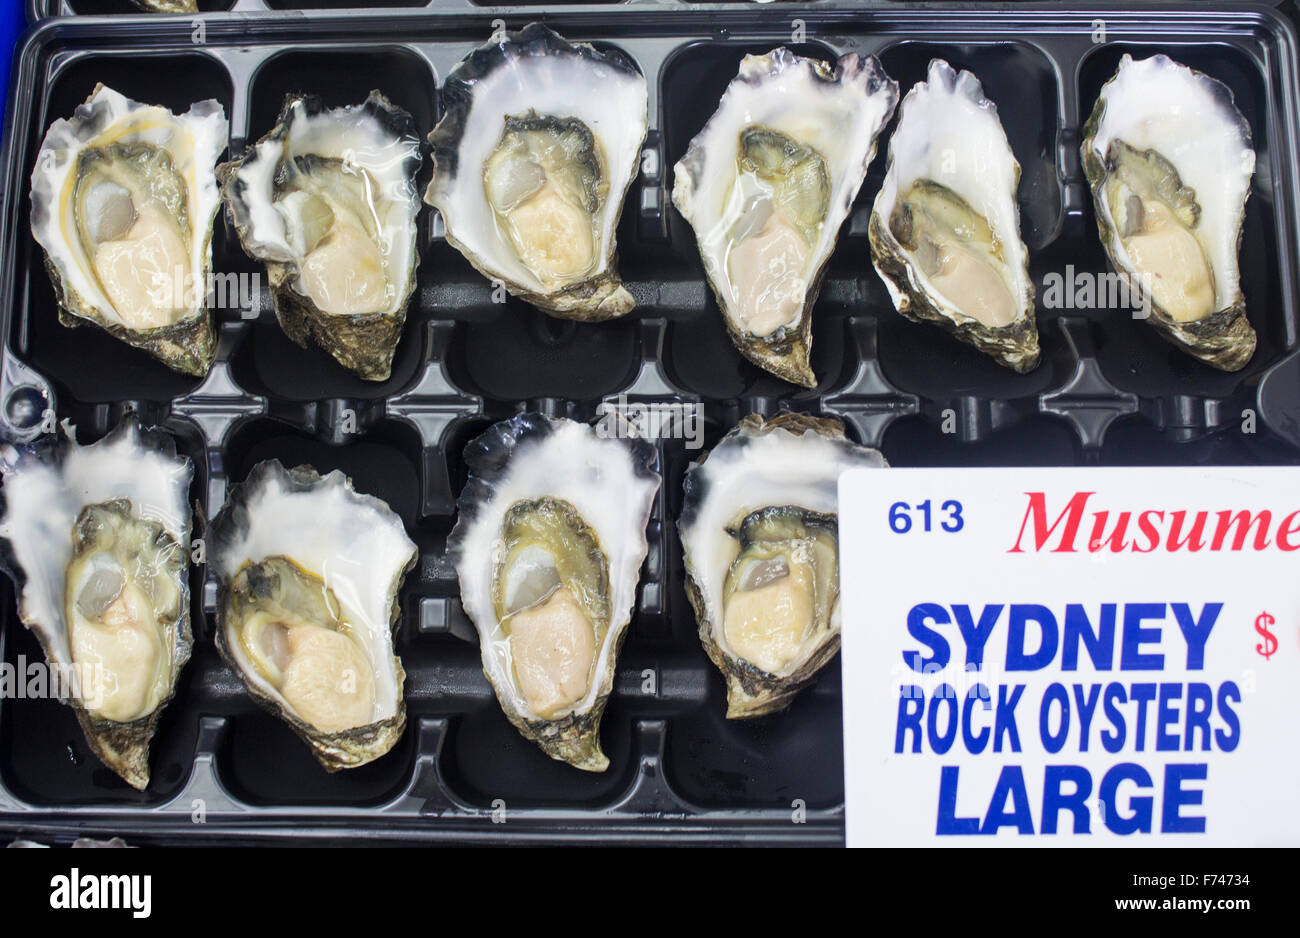 Sydney rock oysters on sale at stall at Sydney Fish Market New South Wales NSW Australia Stock Photo